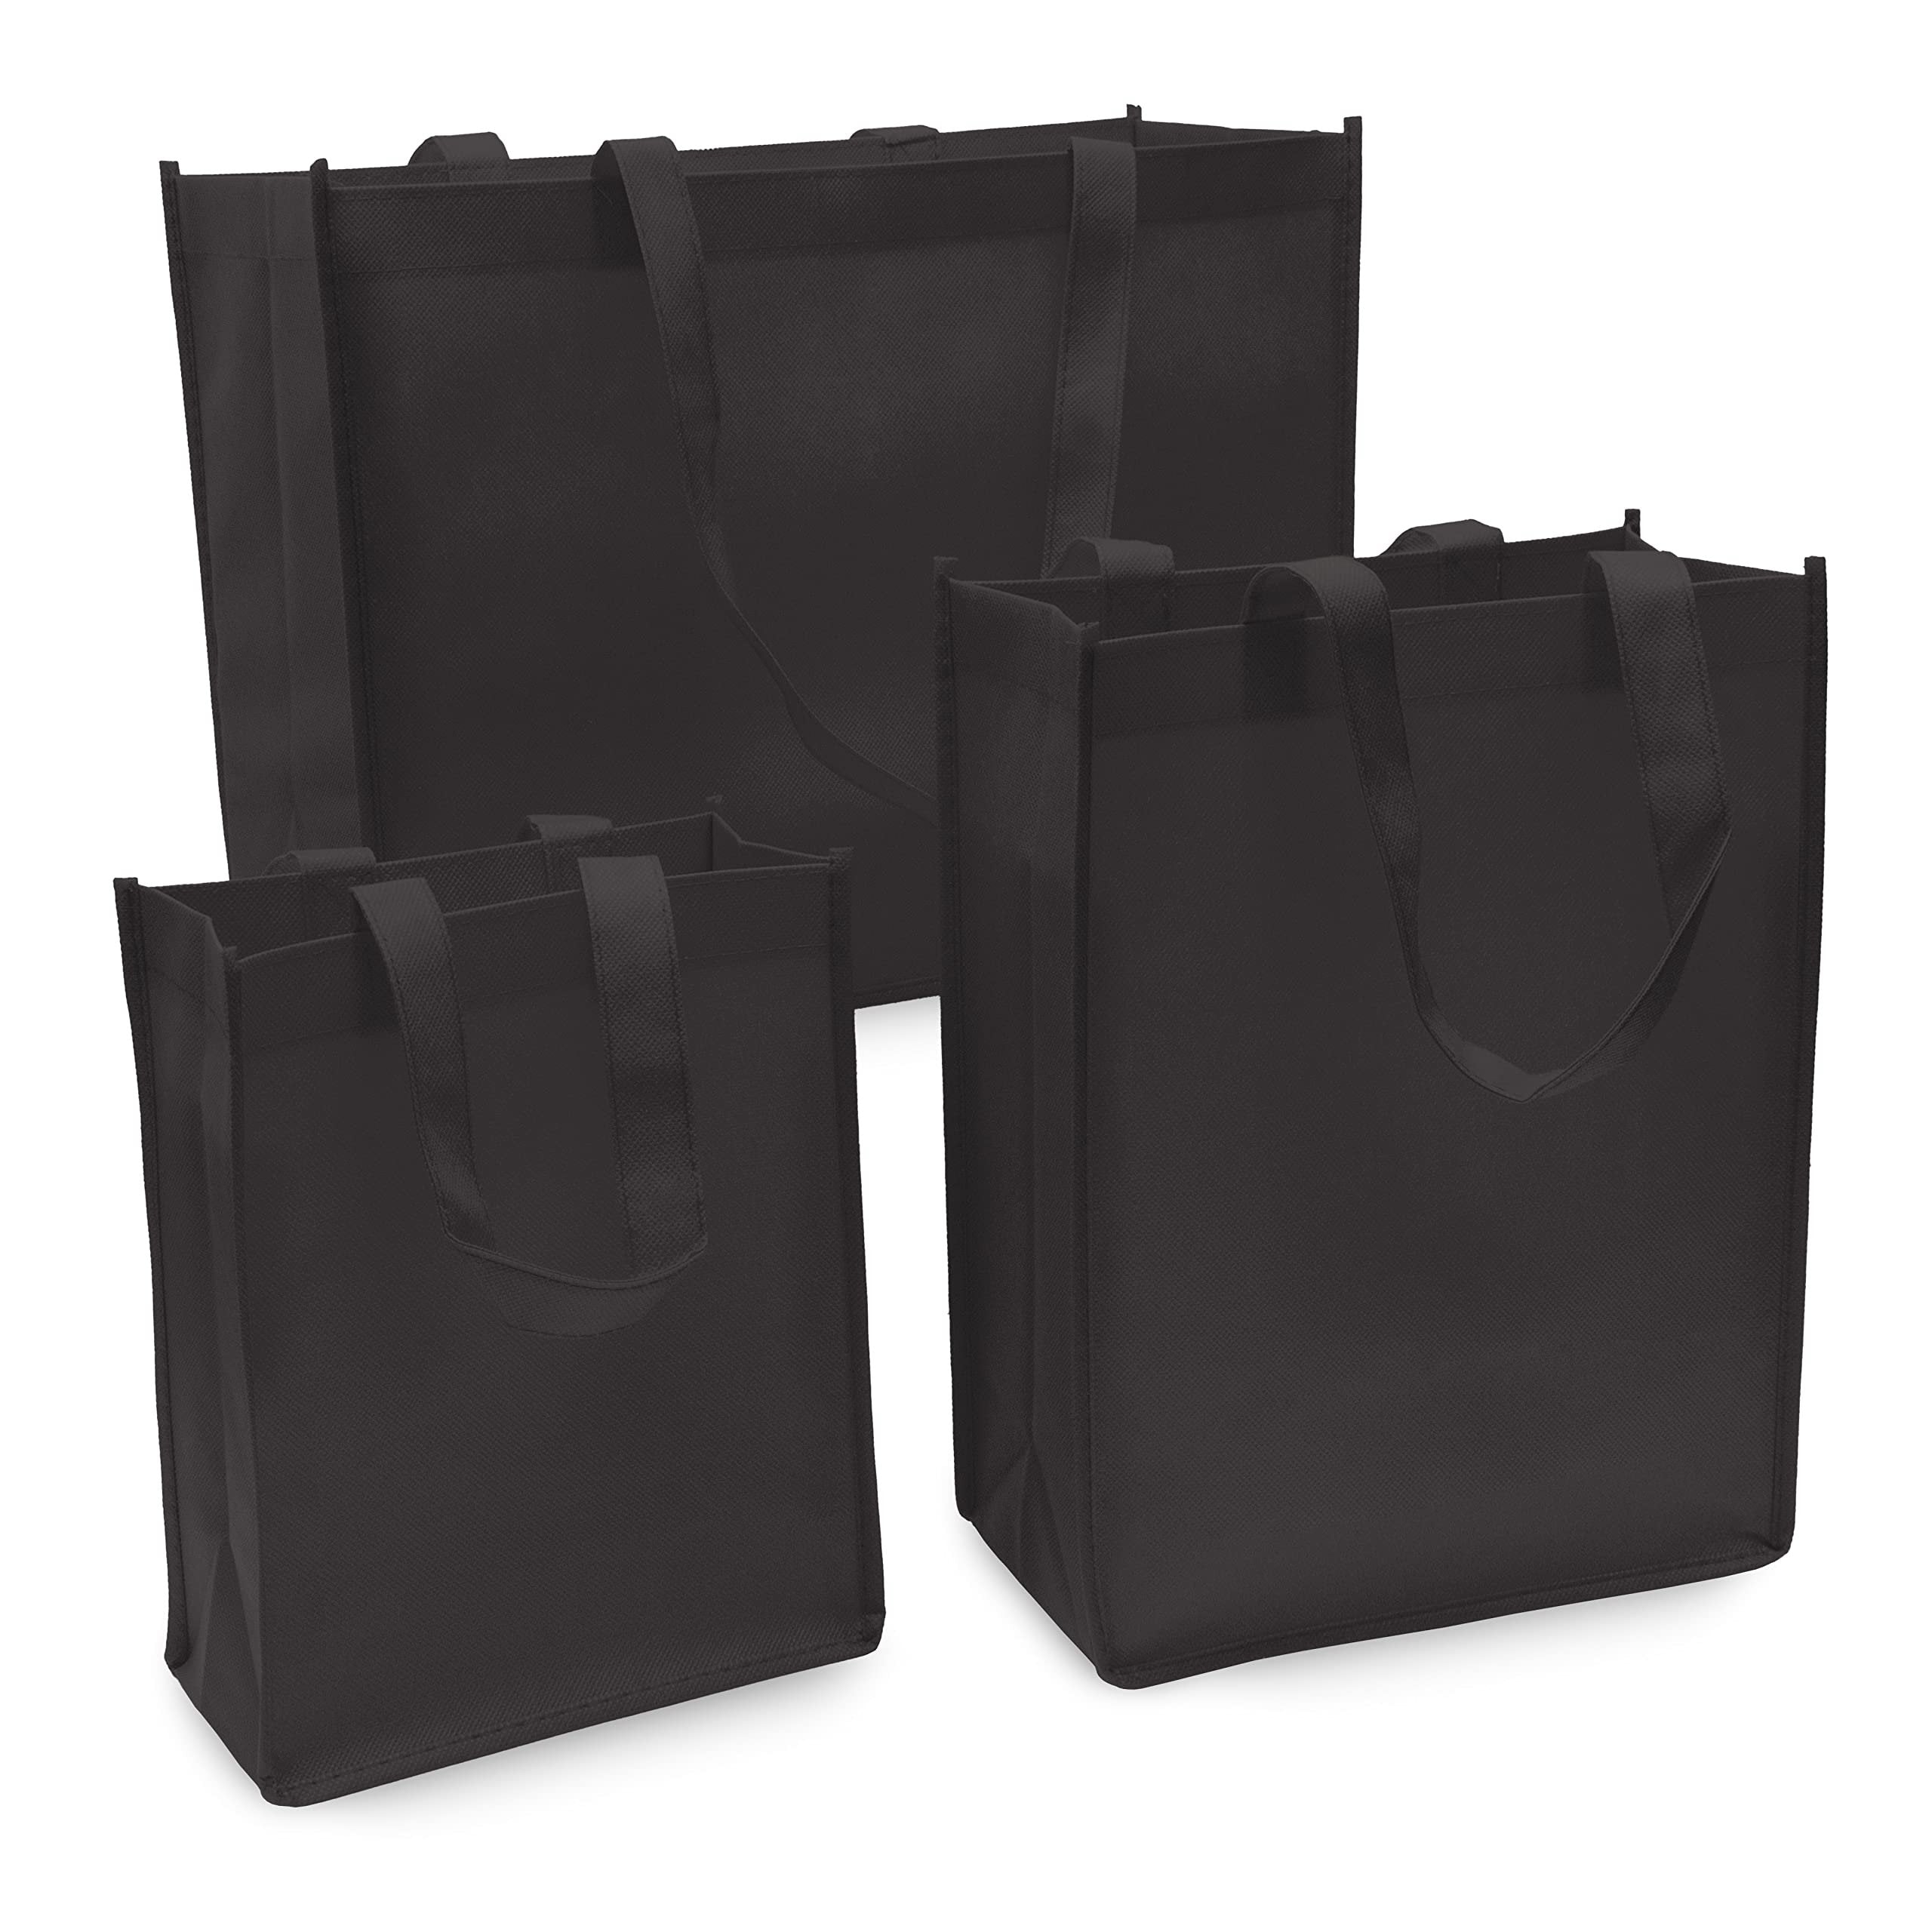 12 Piece Assortment Black Gift Bags - Reusable Totes for Shopping and Events